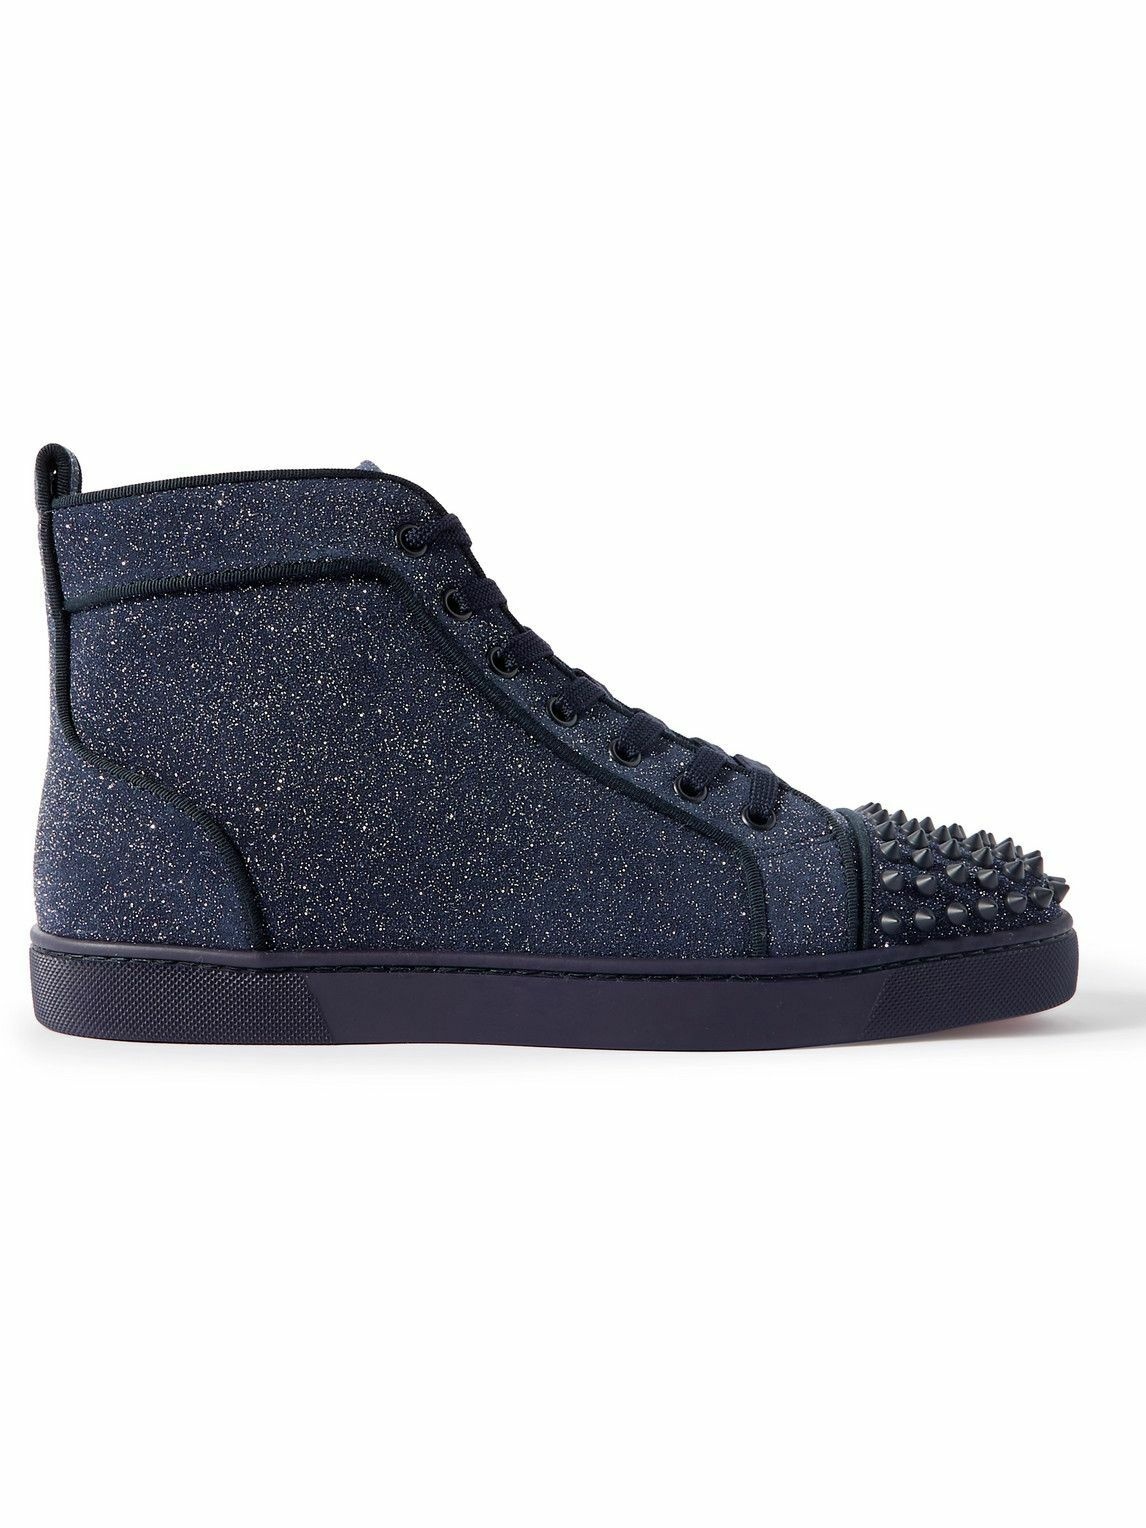 Christian Louboutin - Louis Spiked Glitter Suede-Trimmed Leather Sneakers - Blue Christian Louboutin